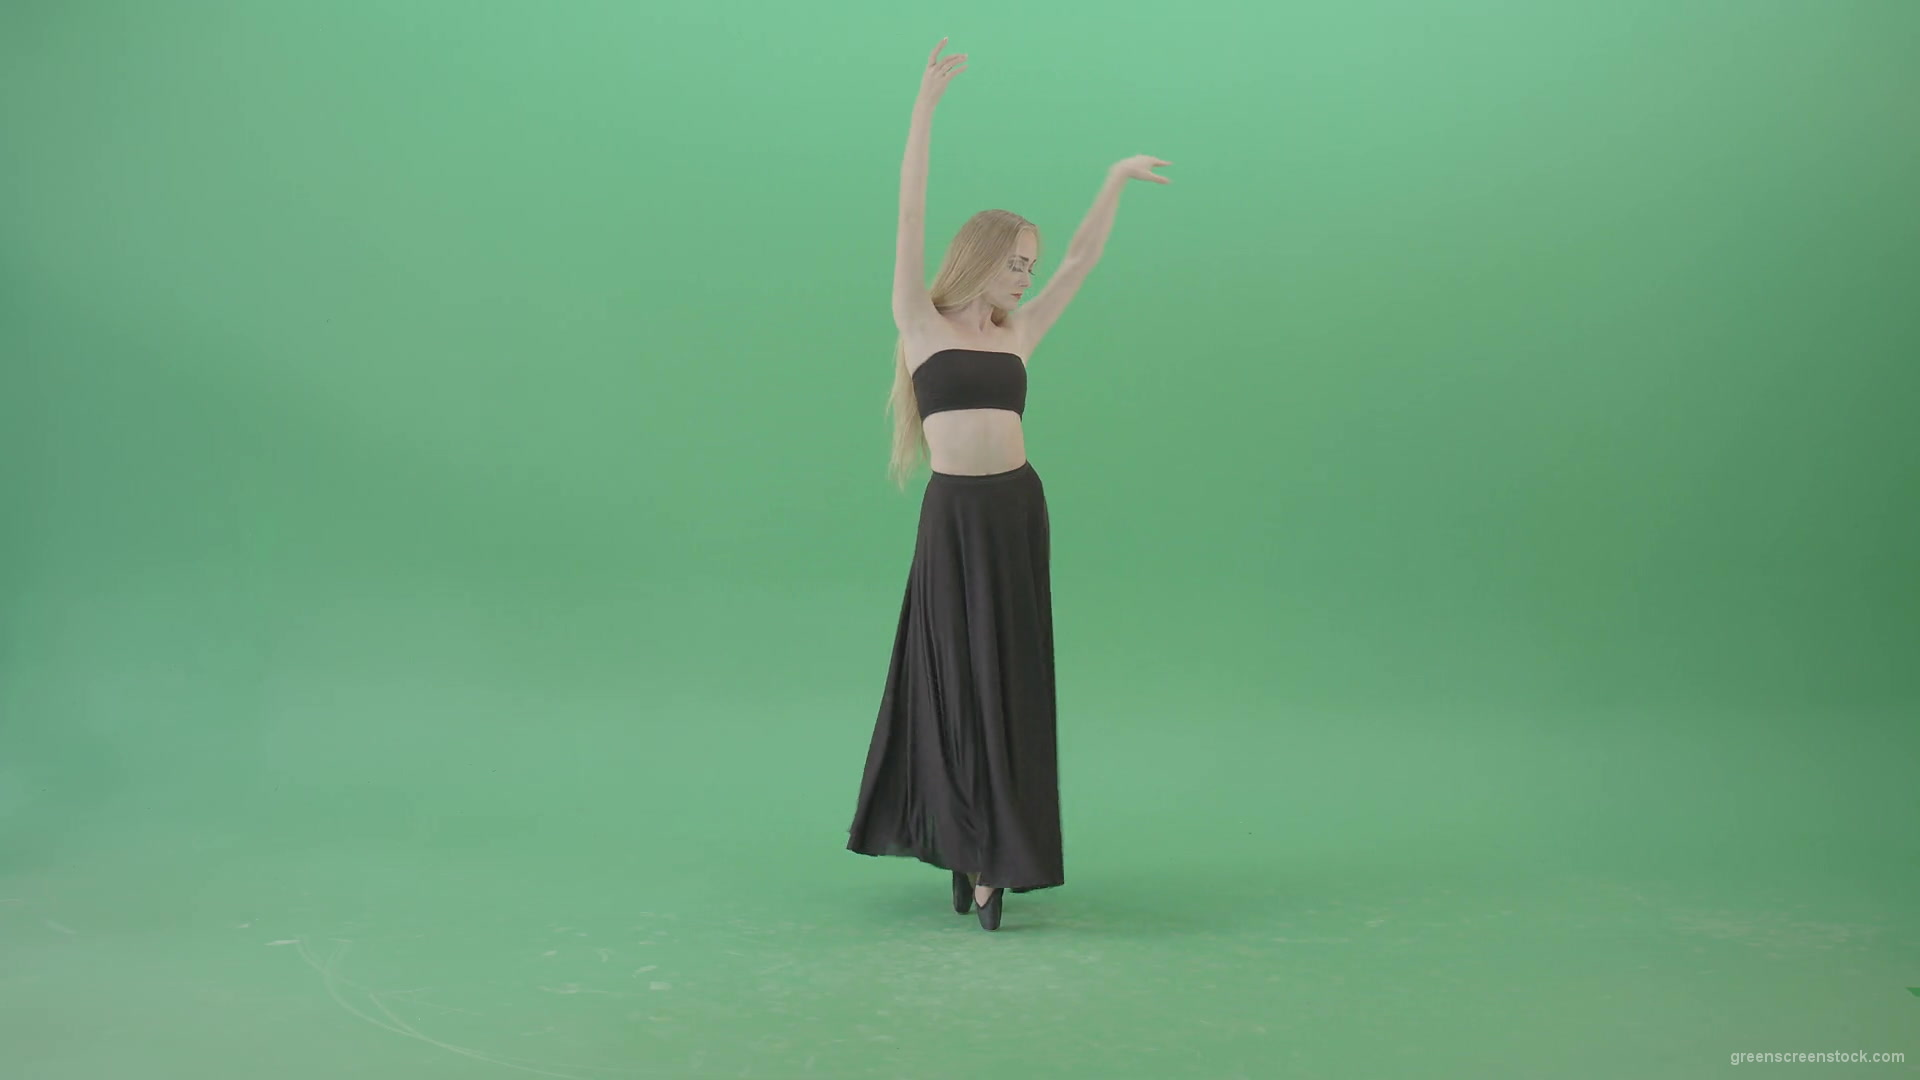 Spain-Ballet-dance-by-blonde-passion-ballerina-girl-on-green-screen-4K-Video-Footage-1920_007 Green Screen Stock